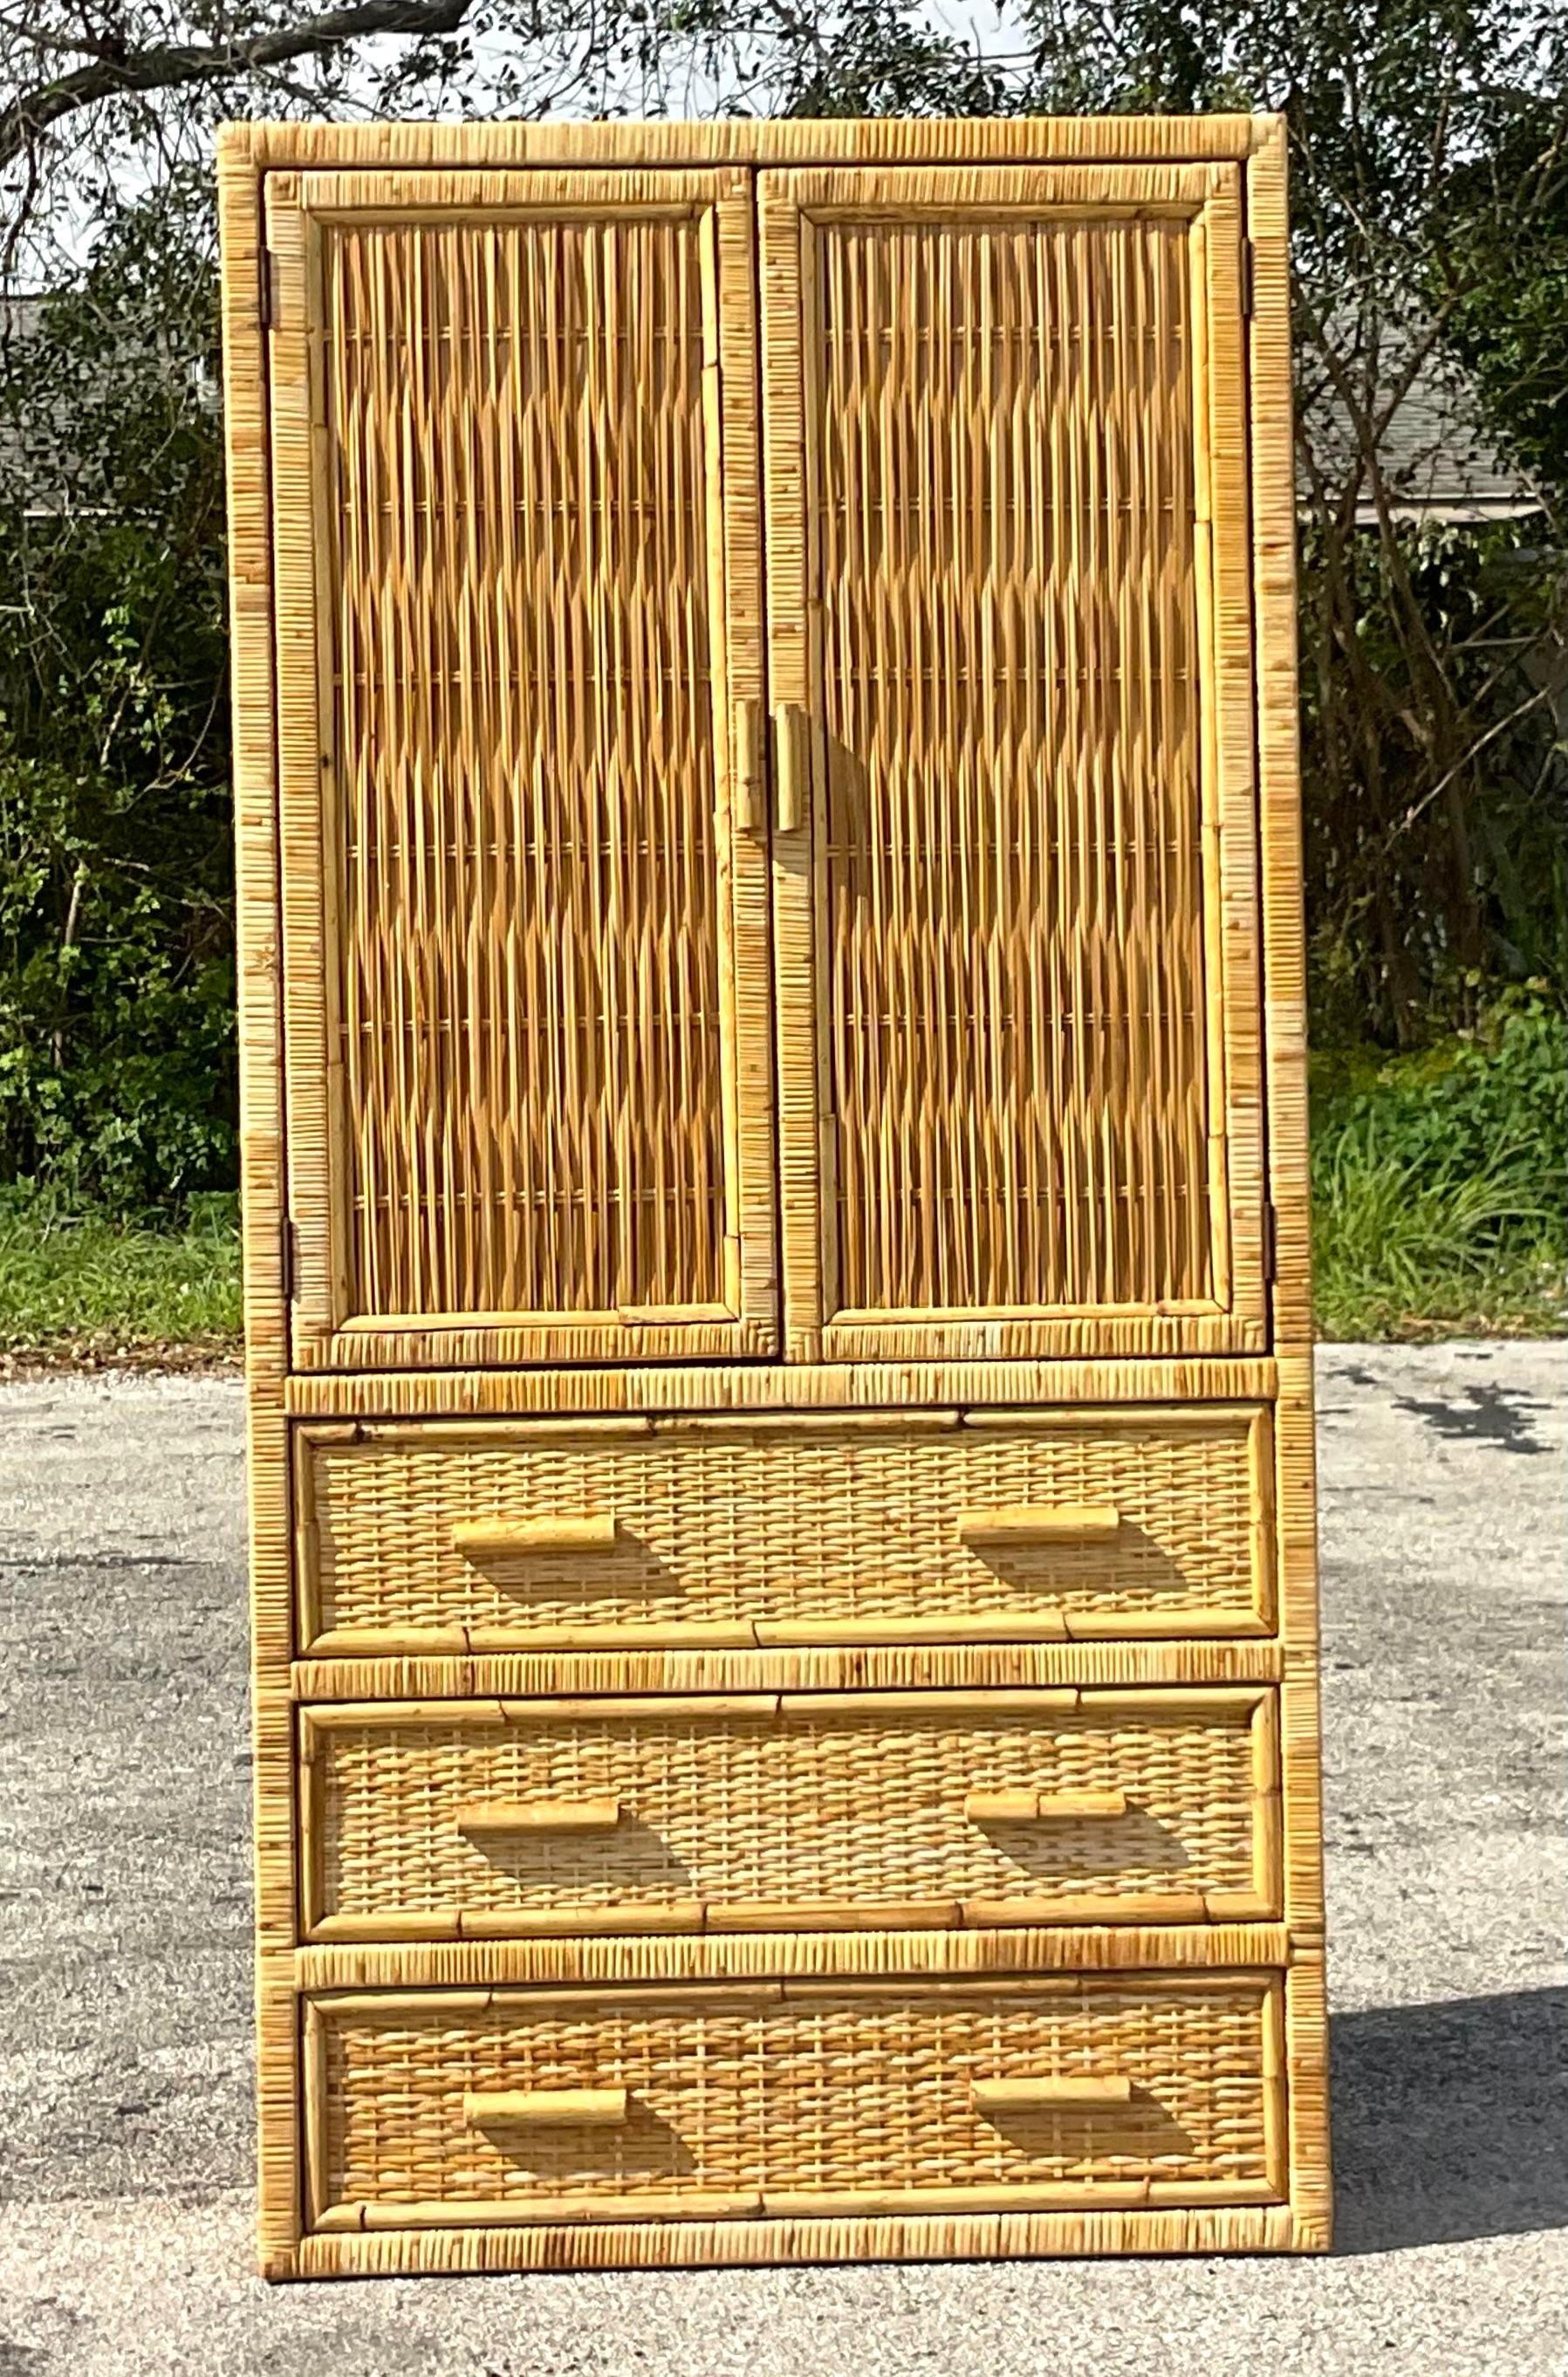 A fabulous vintage Coastal armoire. A chic woven rattan with wrapped rattan frame. Lots of great interior shelving makes it perfect for storage. Great in the bathroom, toy room or filled with fluffy white towels in the pool house. Acquired from a